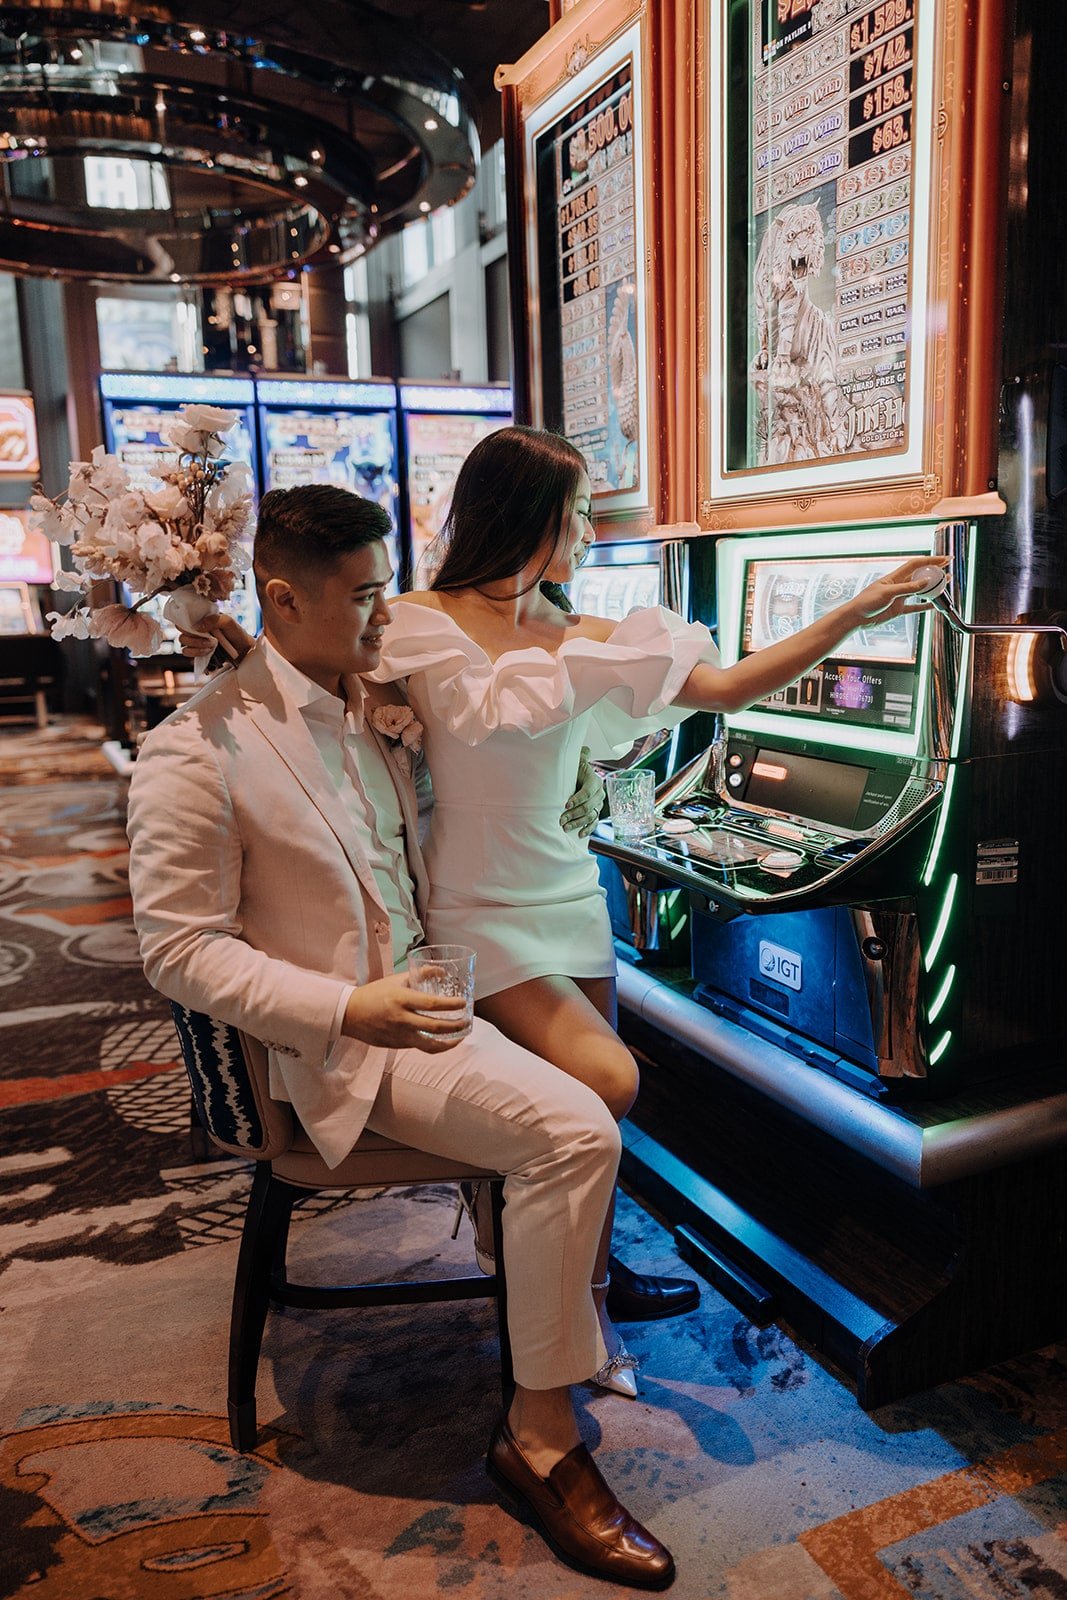 Bride and groom play in a Casino during their Las Vegas elopement